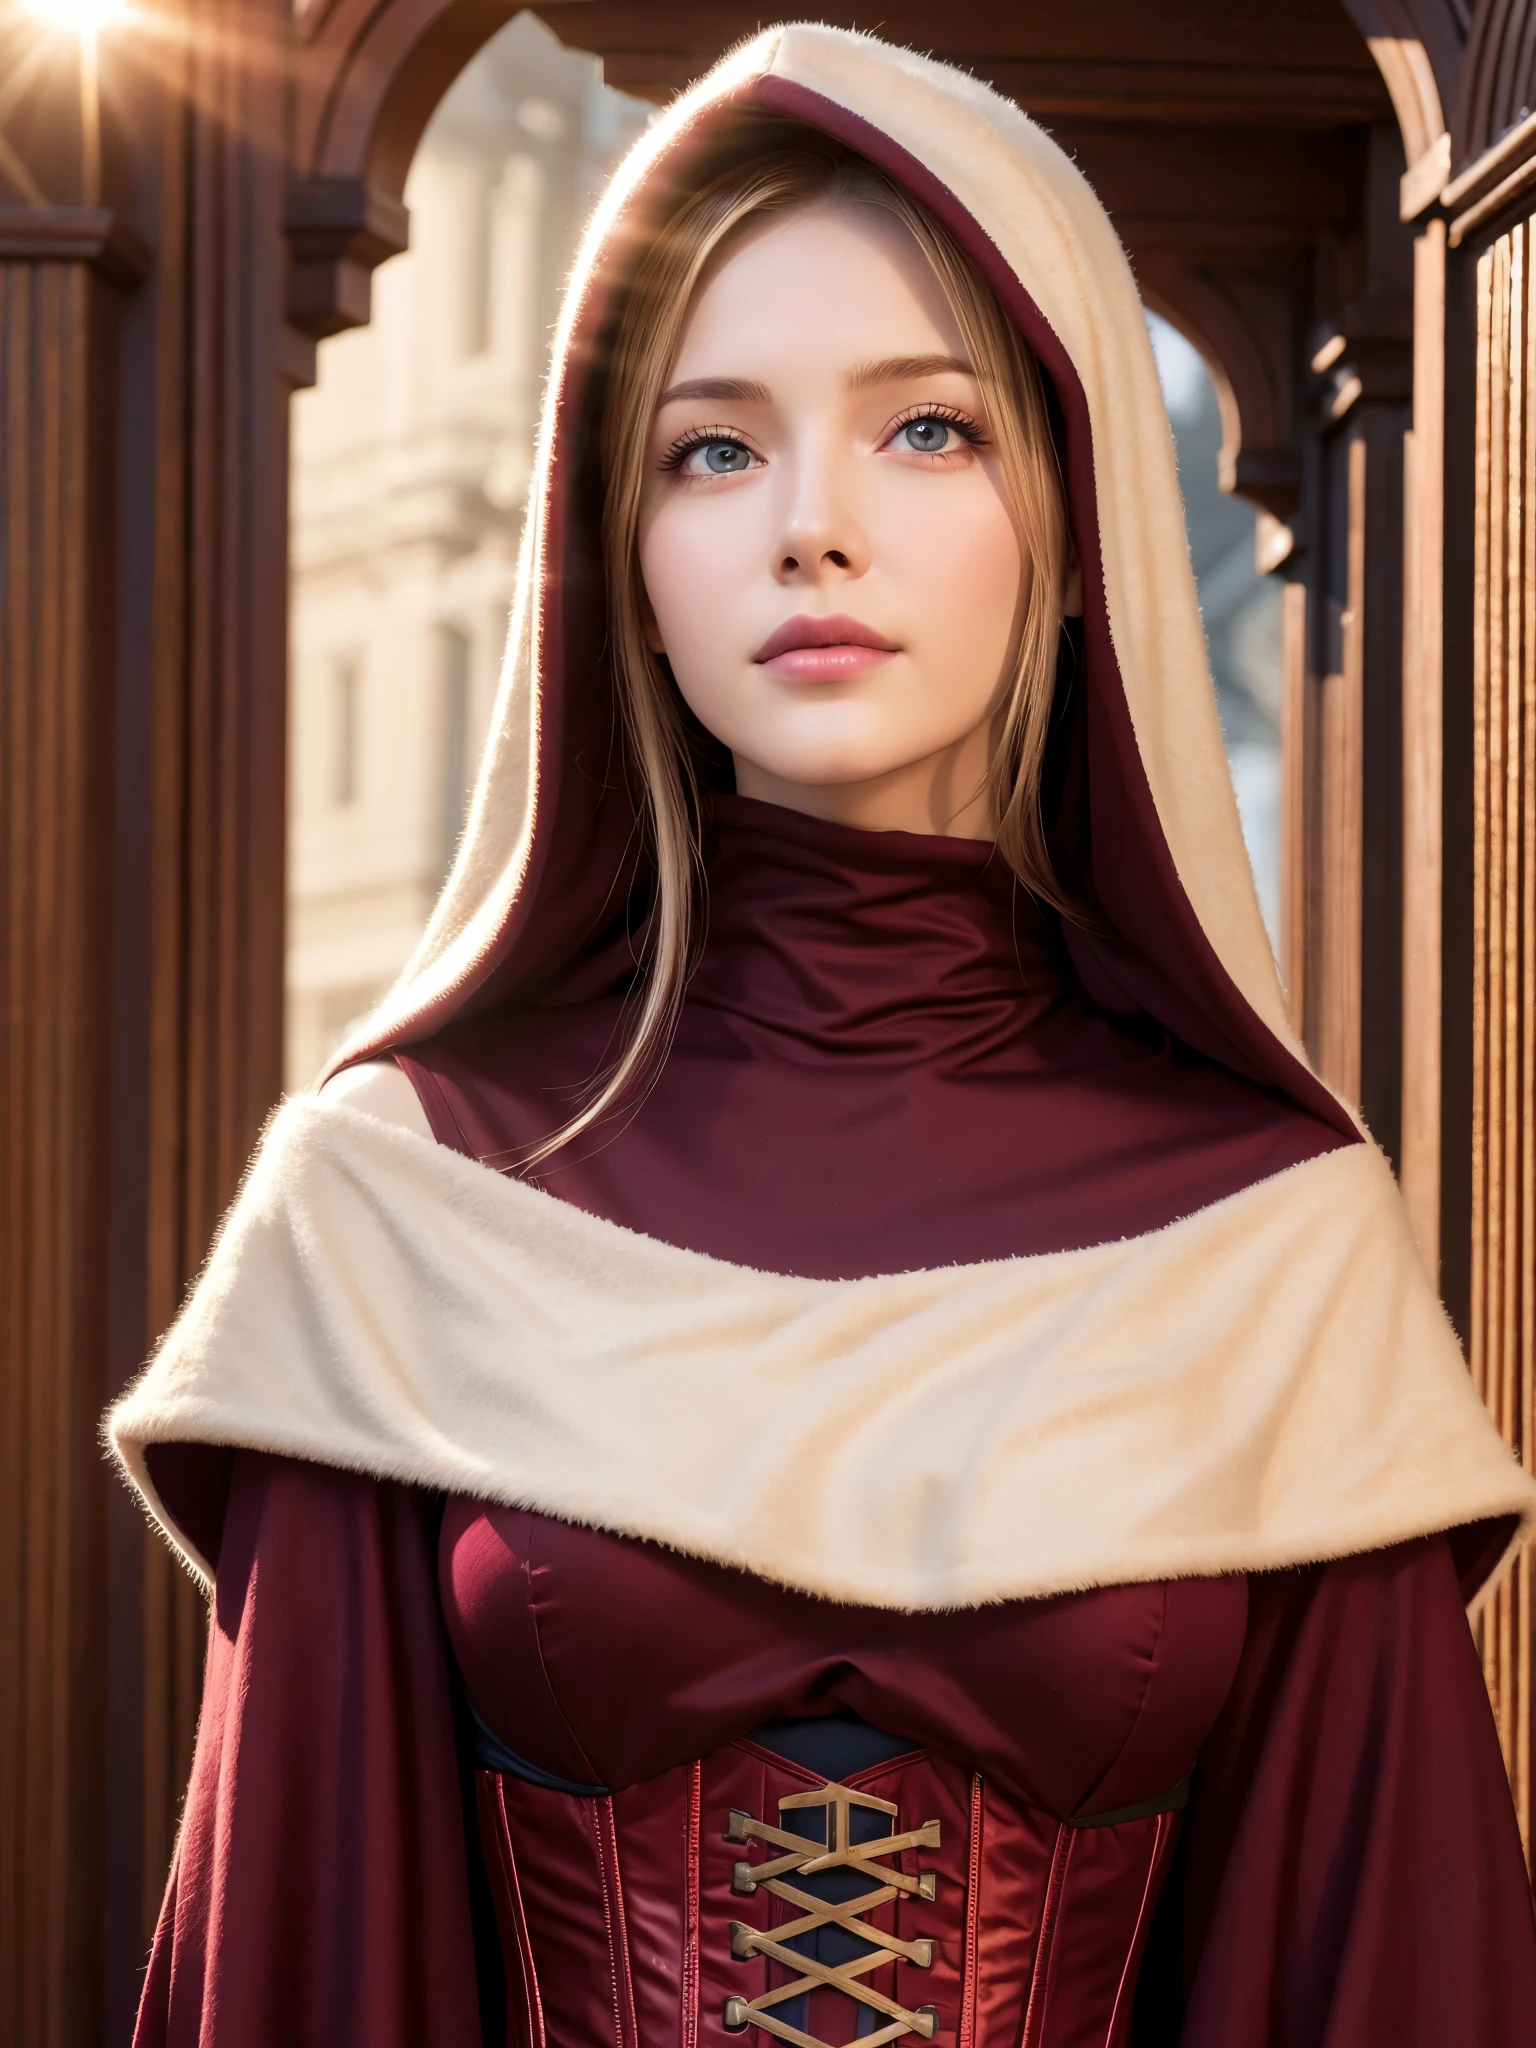 1 girl, wearing huge maroon hood up, (photo realistic:1.4), (hyper realistic:1.4), (realistic:1.3), (smoother lighting:1.05), (increase cinematic lighting quality:0.9), 32K, 1girl,20yo girl, realistic lighting, backlighting, light on face, ray trace, girl wearing a maroon off shoulder robe, wolf blonde hair with blue eyes, black corset, trimmed leg wear, huge maroon hood up, gorgeous face, high resolution, detailed face, not smiling, long hall library background, hair covering half of the face (brightening light:1.2), (Increase quality:1.4), (best quality real texture skin), finely detailed eyes, finely detailed face, (tired and sleepy and satisfied:0.0), face closeup, t-shirts, (Increase body line mood:1.1), shiny skin